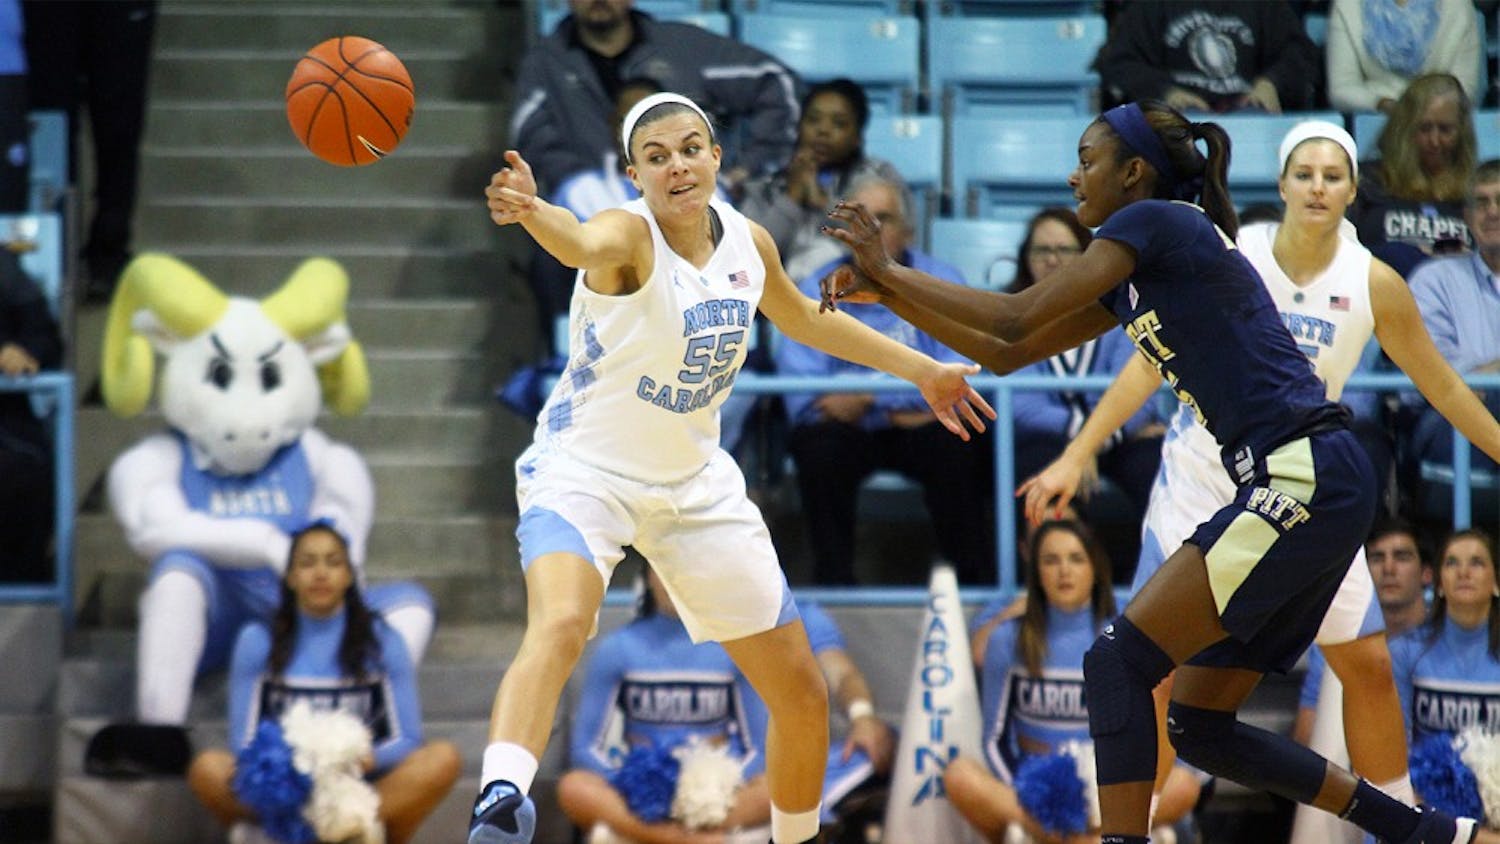 Forward Paige Neuenfeldt (55) deflects the ball in her first game as a Tar Heel in UNC Women's basketball's blowout loss to Pittsburgh on Thursday.